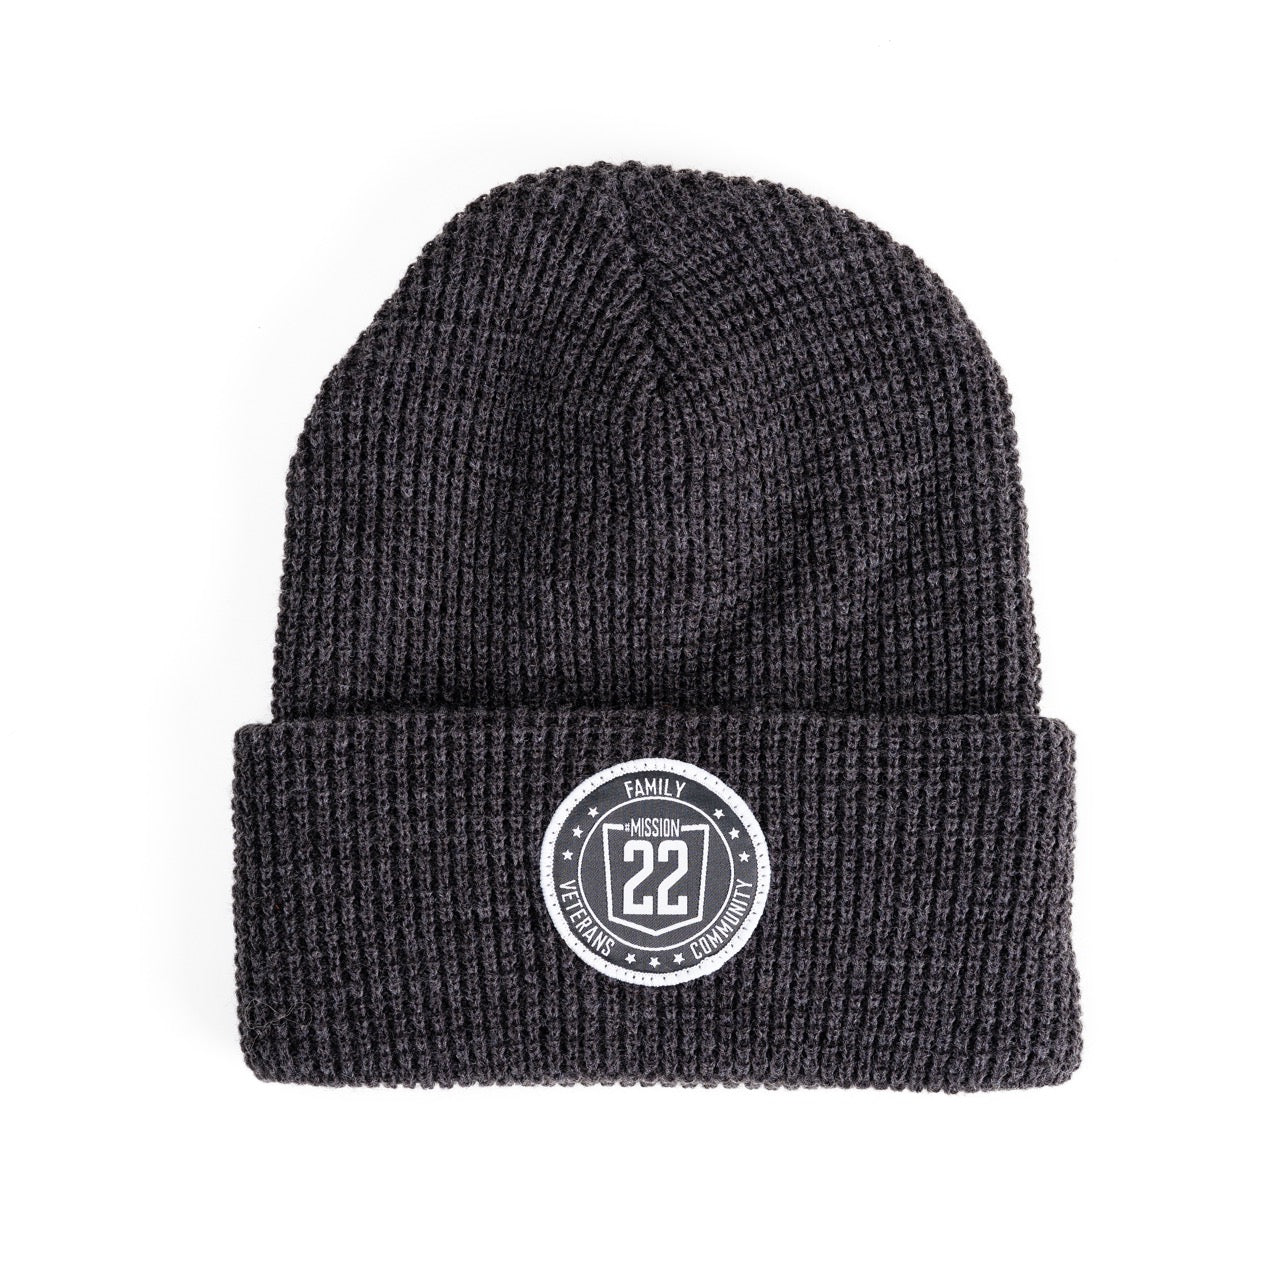 Product Image of Knit Cap #1